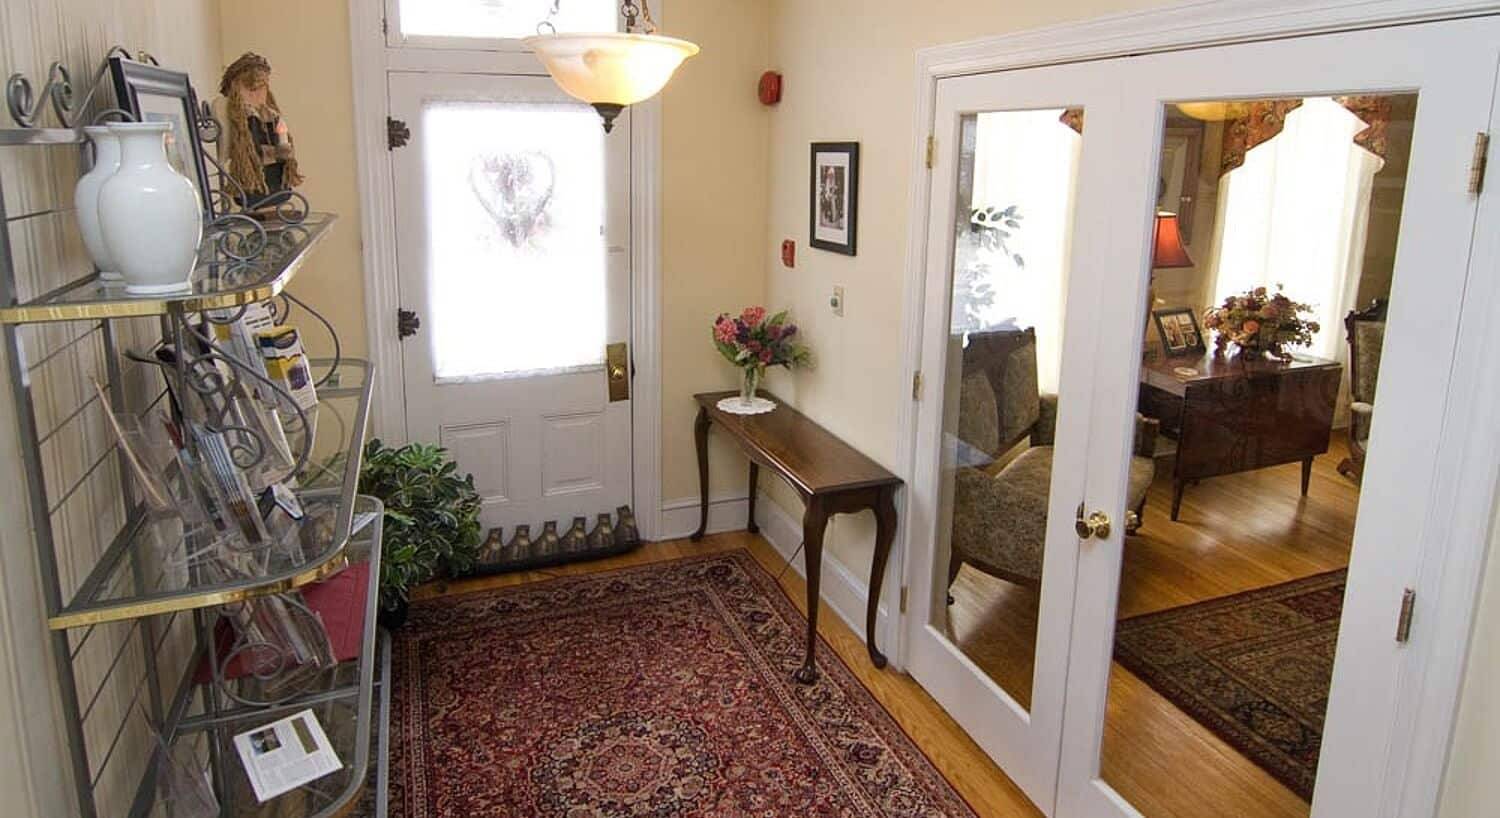 Front entry of a home with tall metal shelving unit, oriental rug and French doors looking into adjoining room